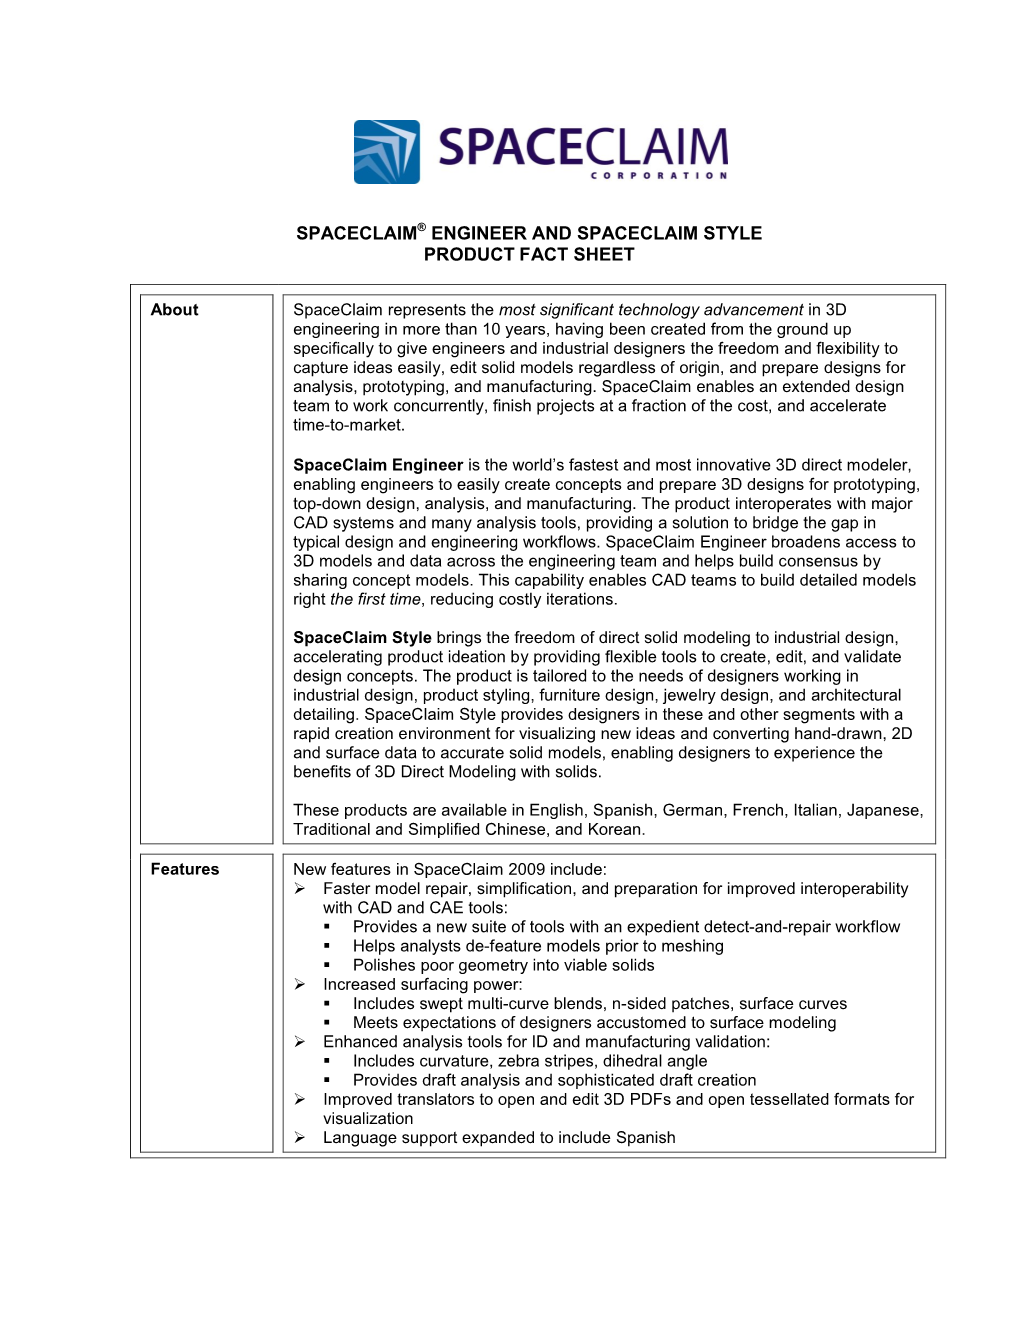 Spaceclaim® Engineer and Spaceclaim Style Product Fact Sheet